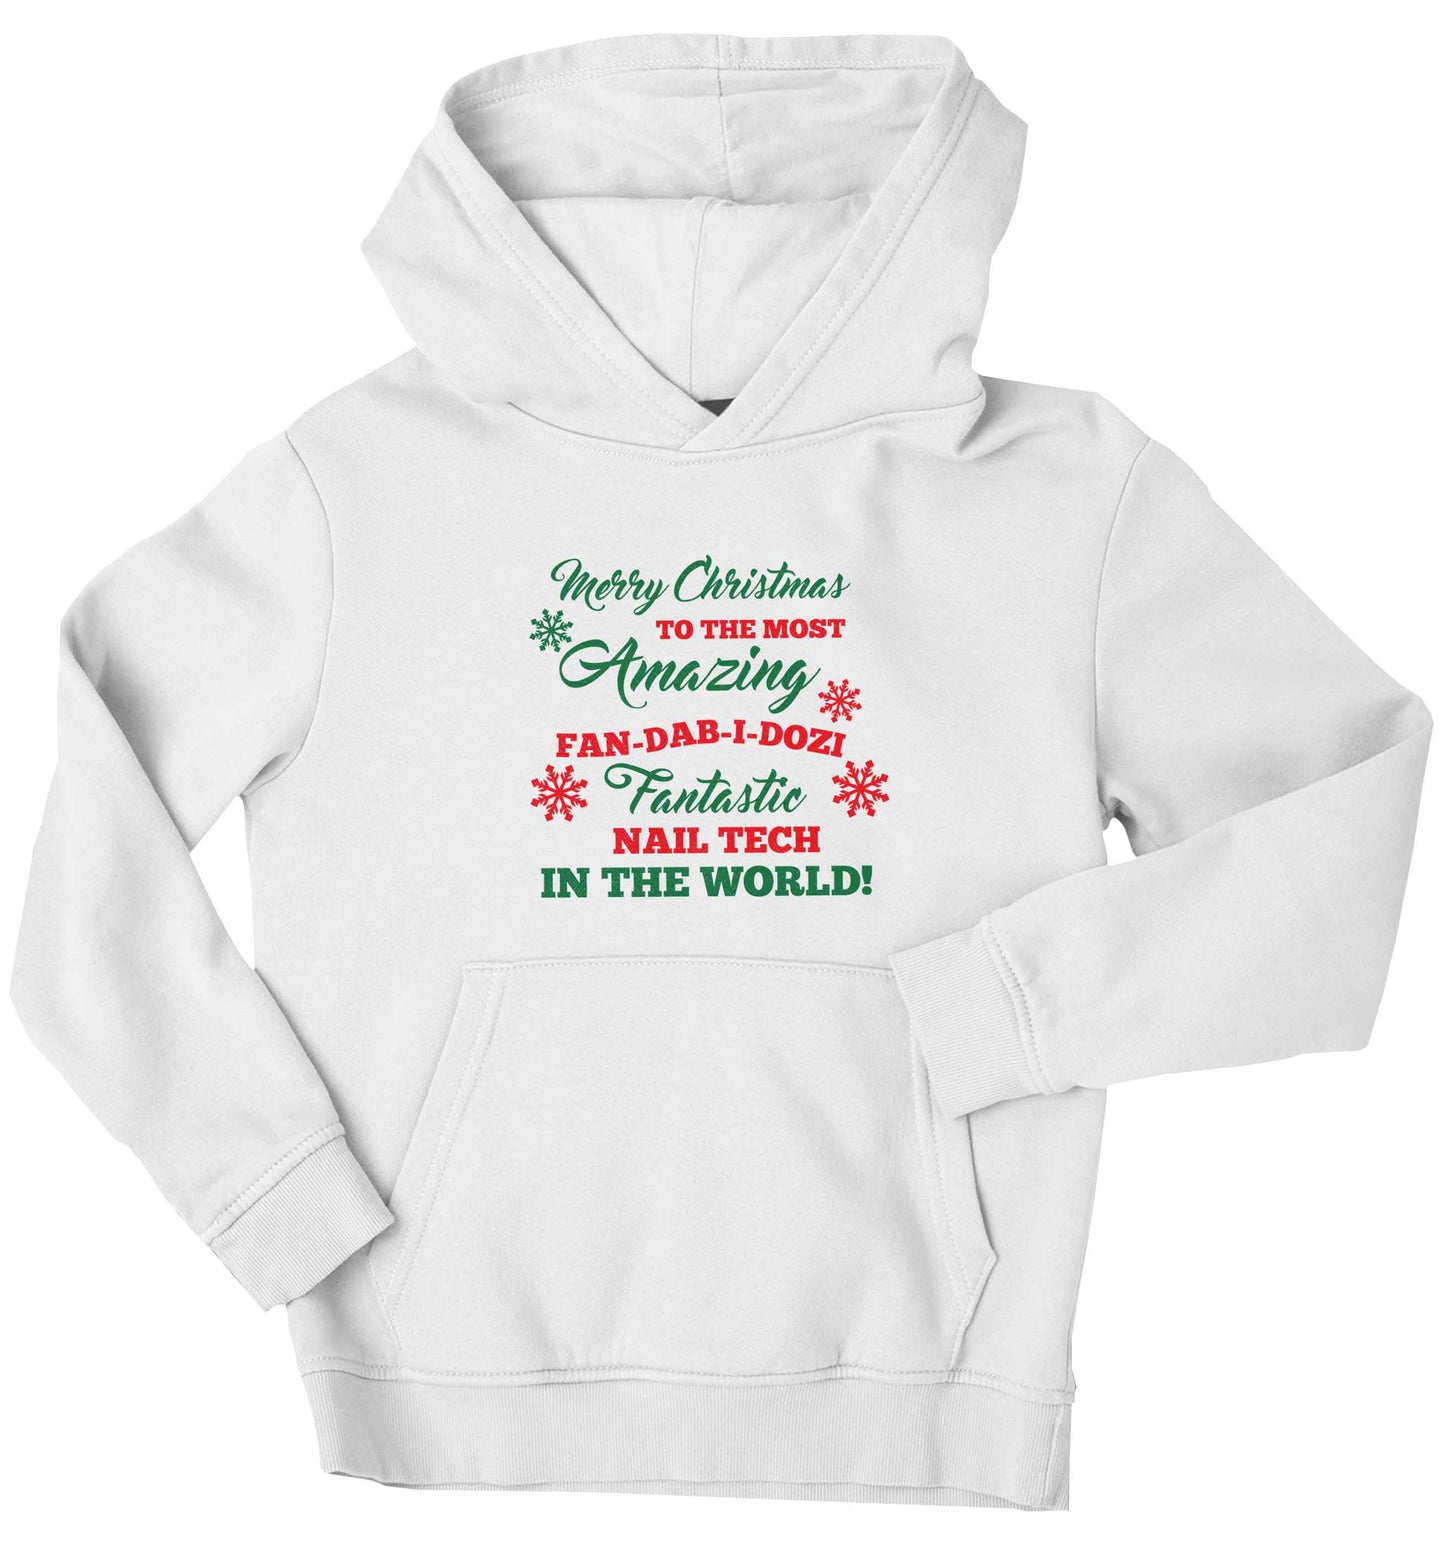 Merry Christmas to the most amazing fan-dab-i-dozi fantasic nail technician in the world children's white hoodie 12-13 Years